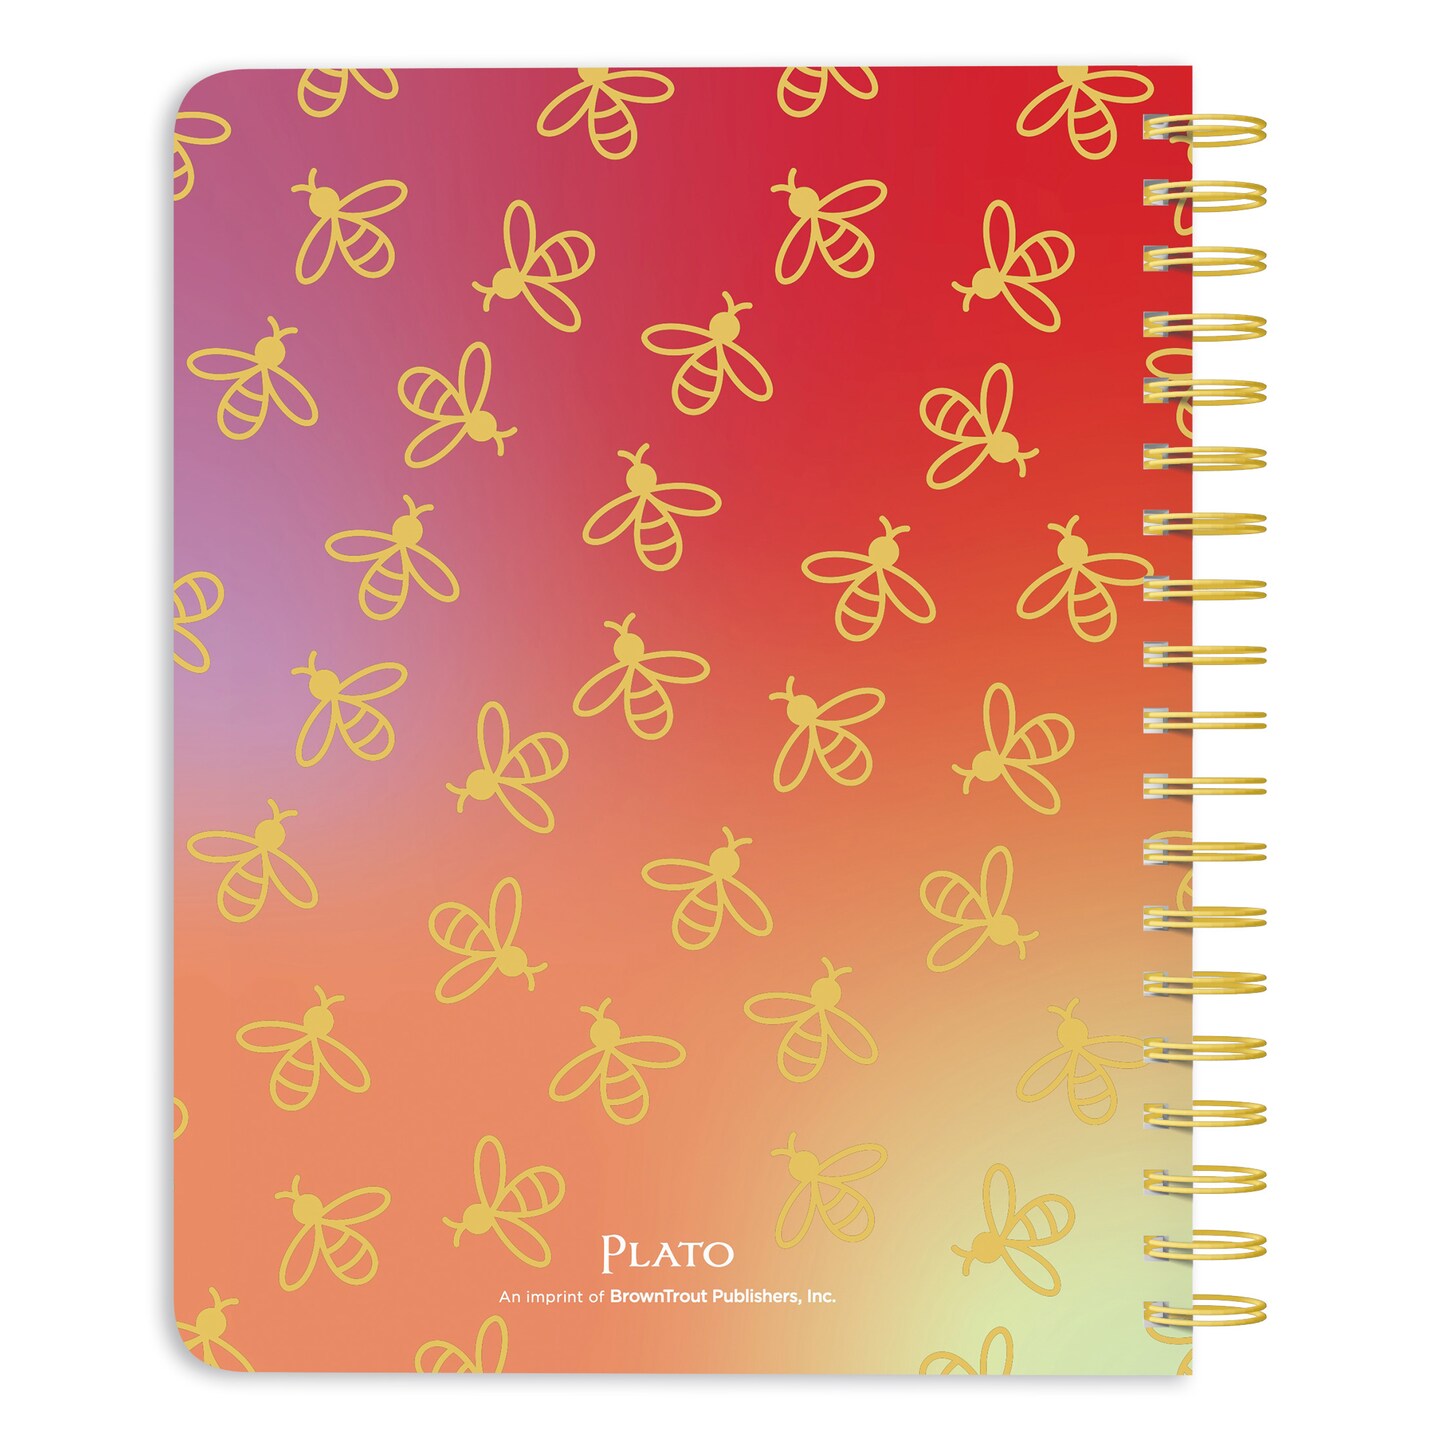 Busy Bees | 2025 6 x 7.75 Inch 18 Months Weekly Desk Planner | Foil Stamped Cover | July 2024 - December 2025 | Plato | Planning Stationery